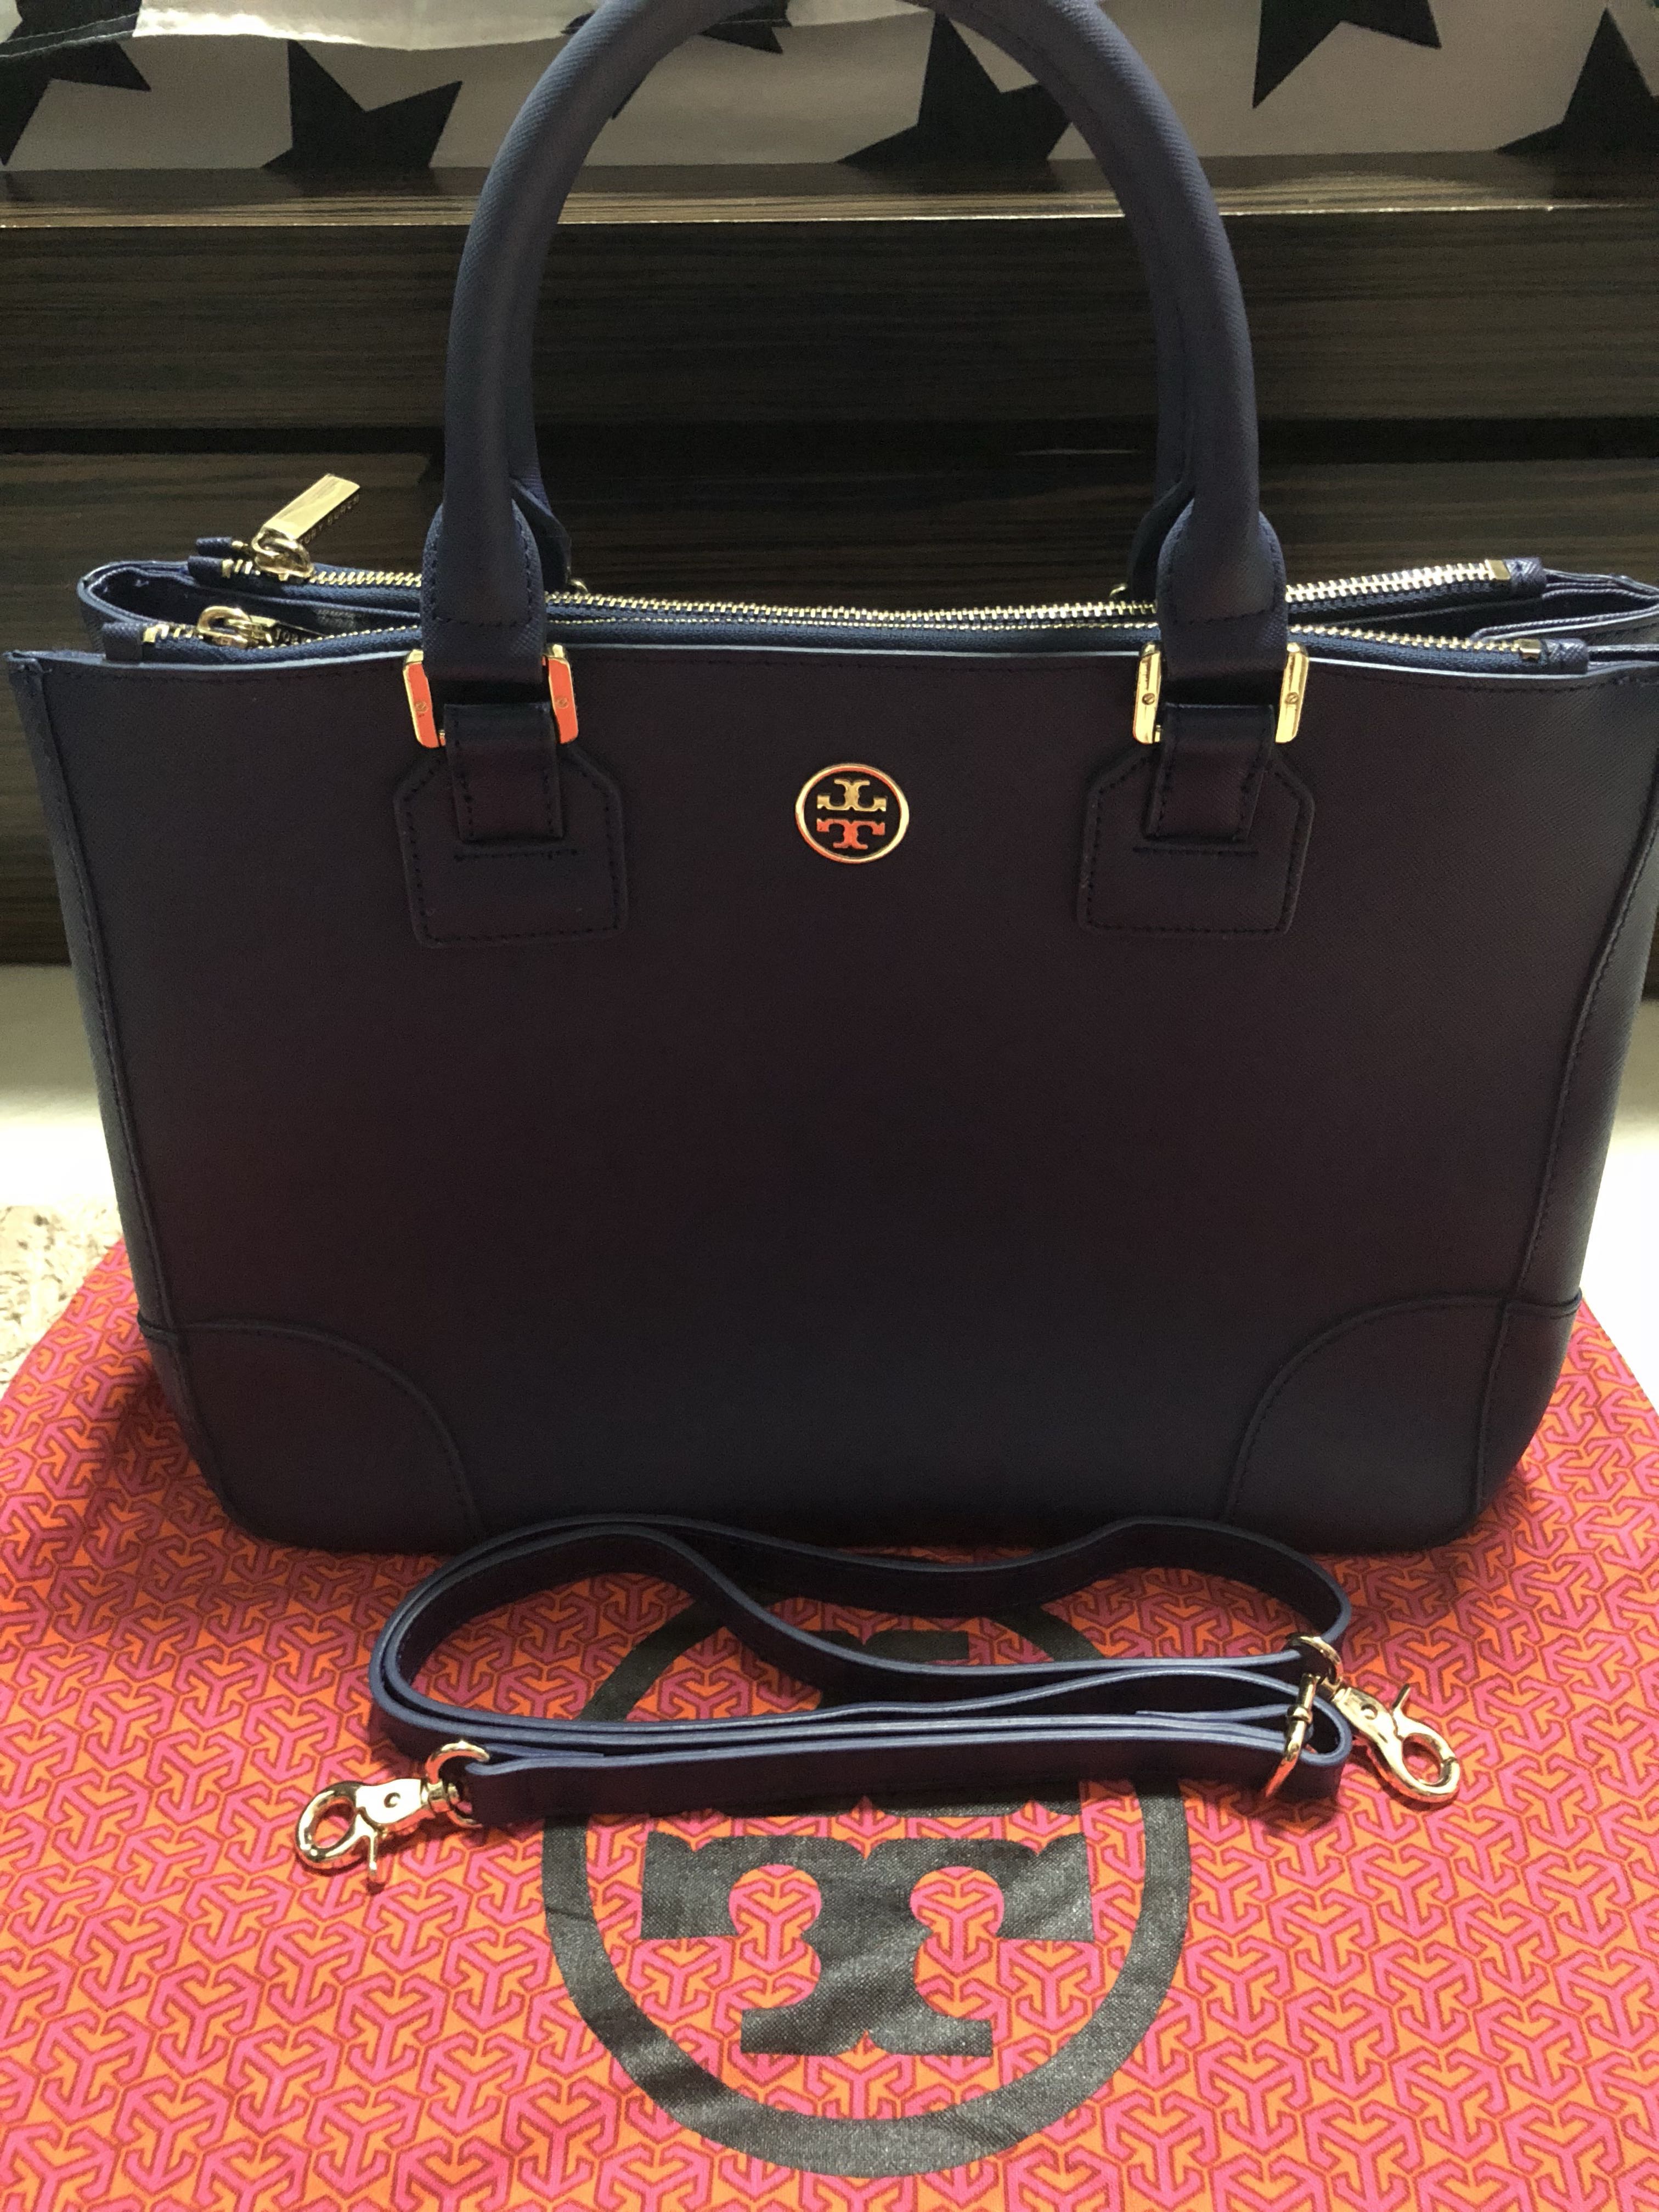 Tory Burch Robinson Double-Zip Tote in Gray